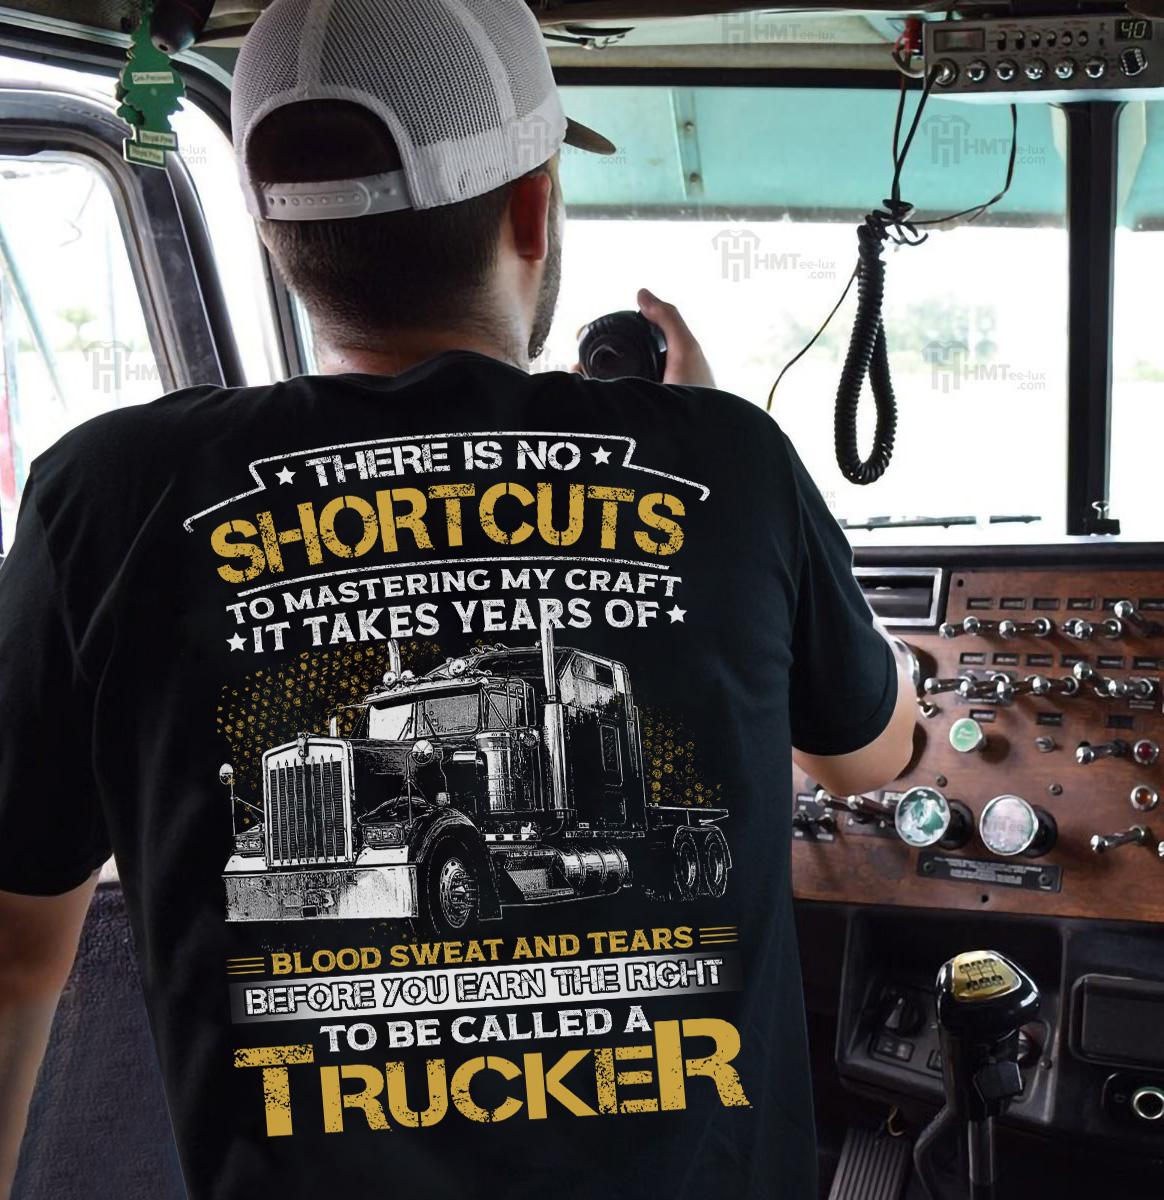 There is no shortcuts to mastering my craft it takes years of blood sweat and tears - Trucker the job, Black truck